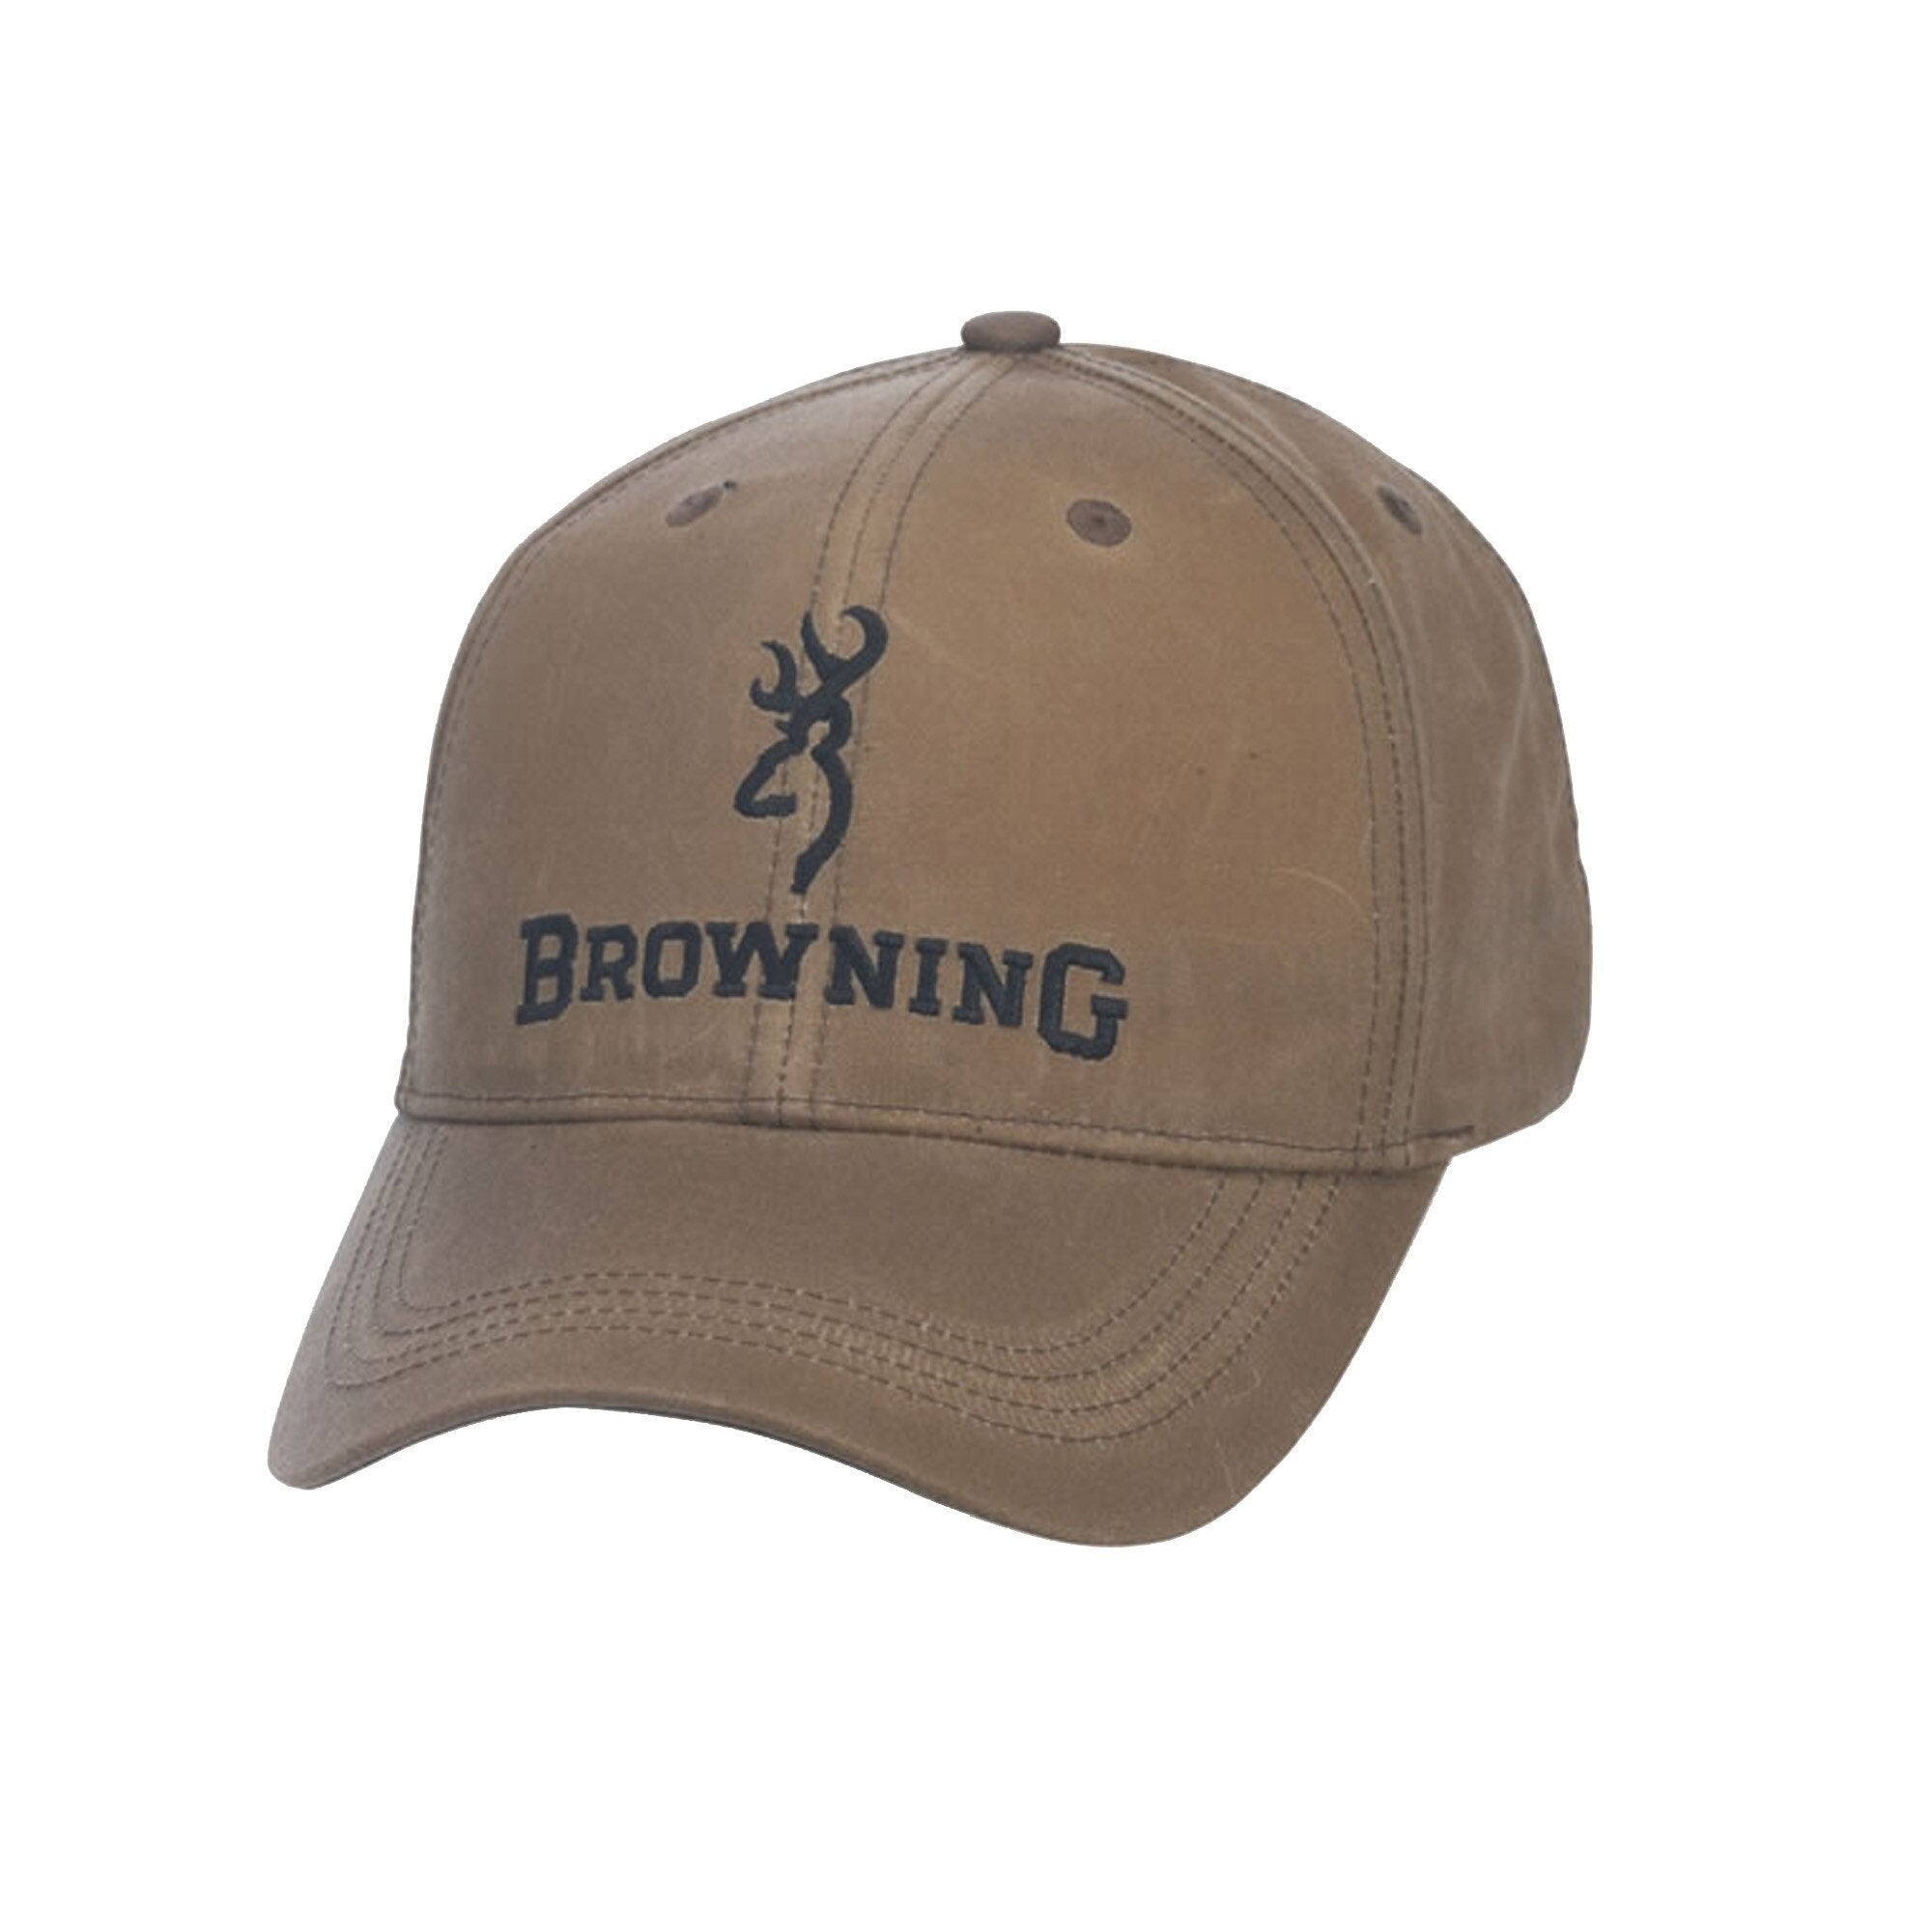 Browning Lite Wax with Logo in Khaki Hat - Pacific Flyway Supplies